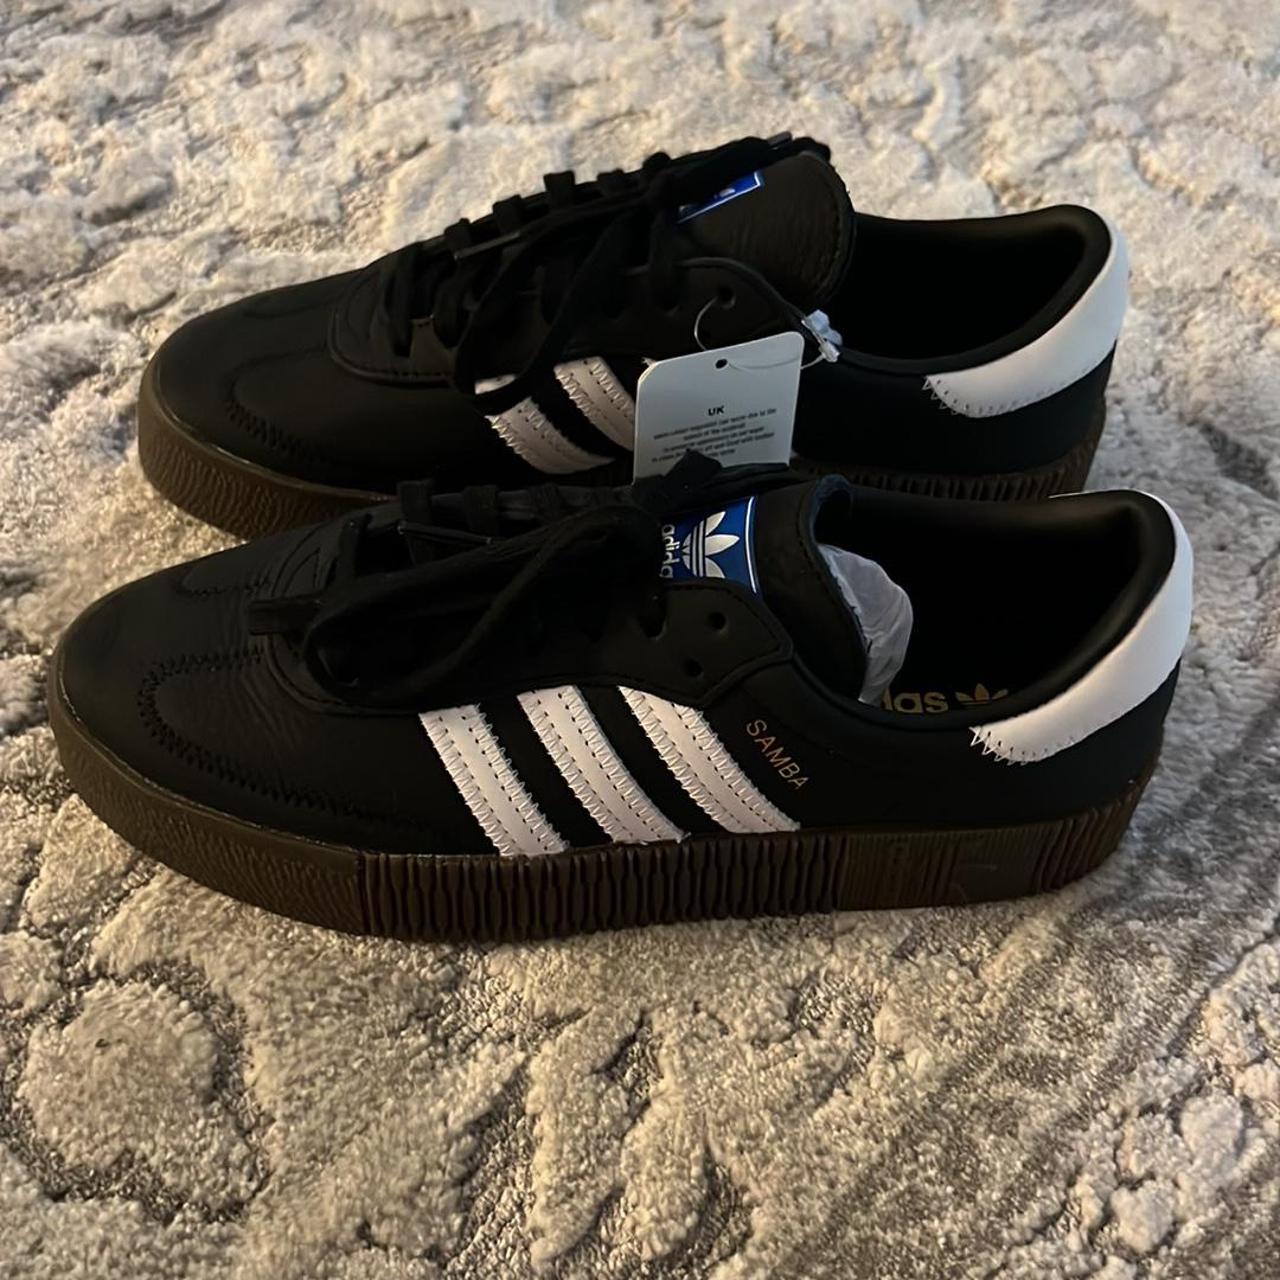 Adidas Women's Black and Brown Trainers (2)